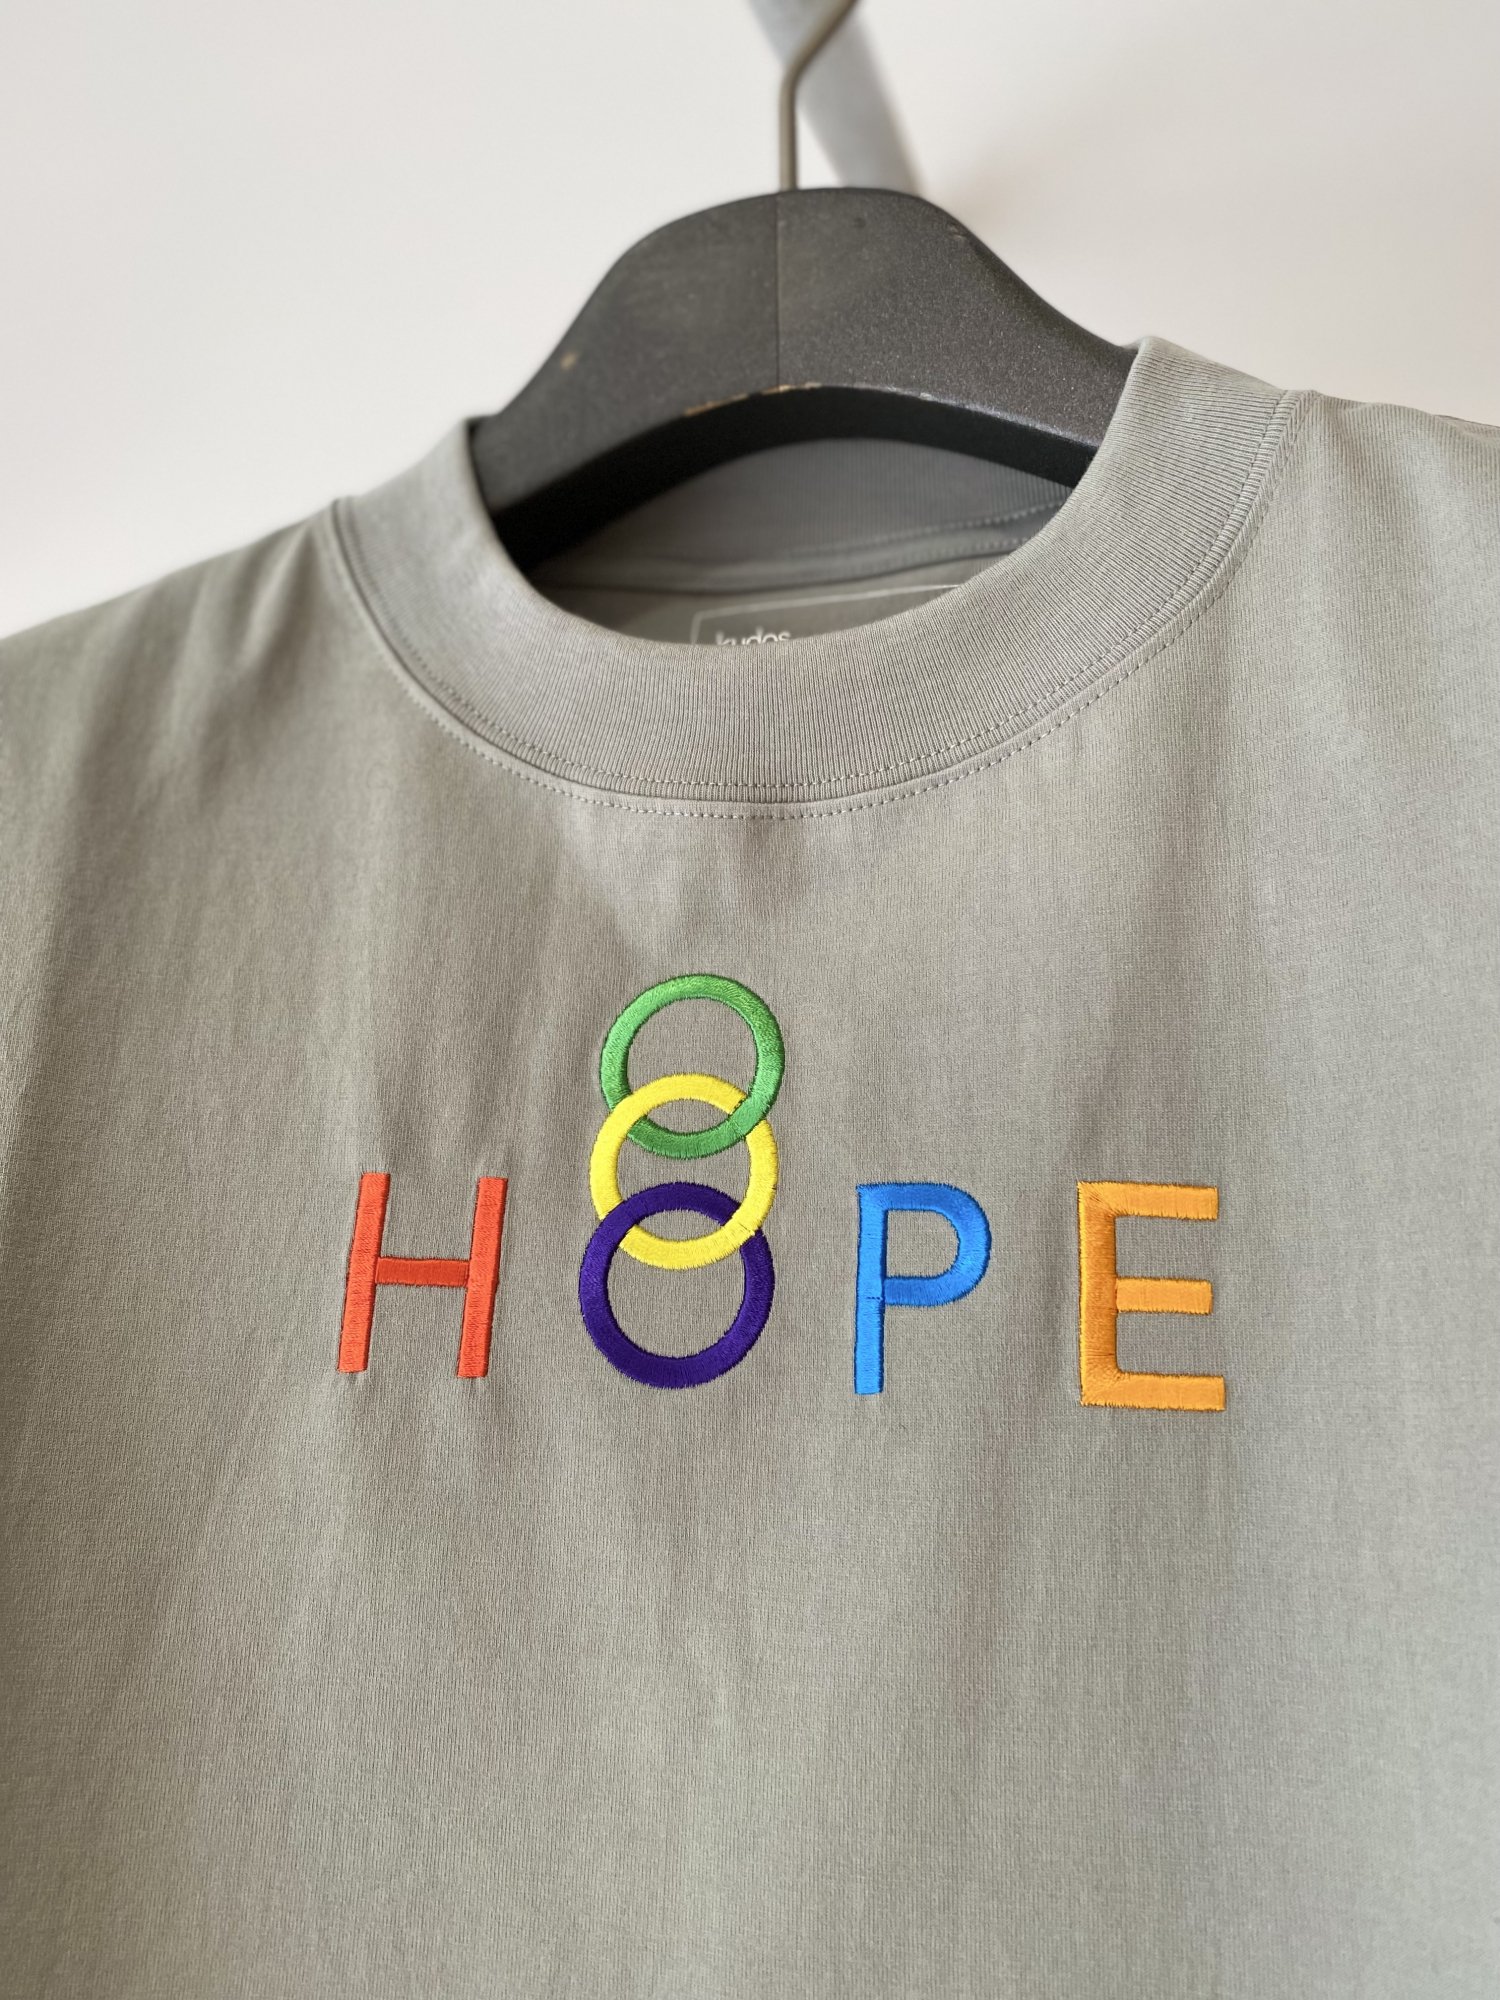 kudos<br />HOPE T-SHIRT / GRAY<img class='new_mark_img2' src='https://img.shop-pro.jp/img/new/icons14.gif' style='border:none;display:inline;margin:0px;padding:0px;width:auto;' />